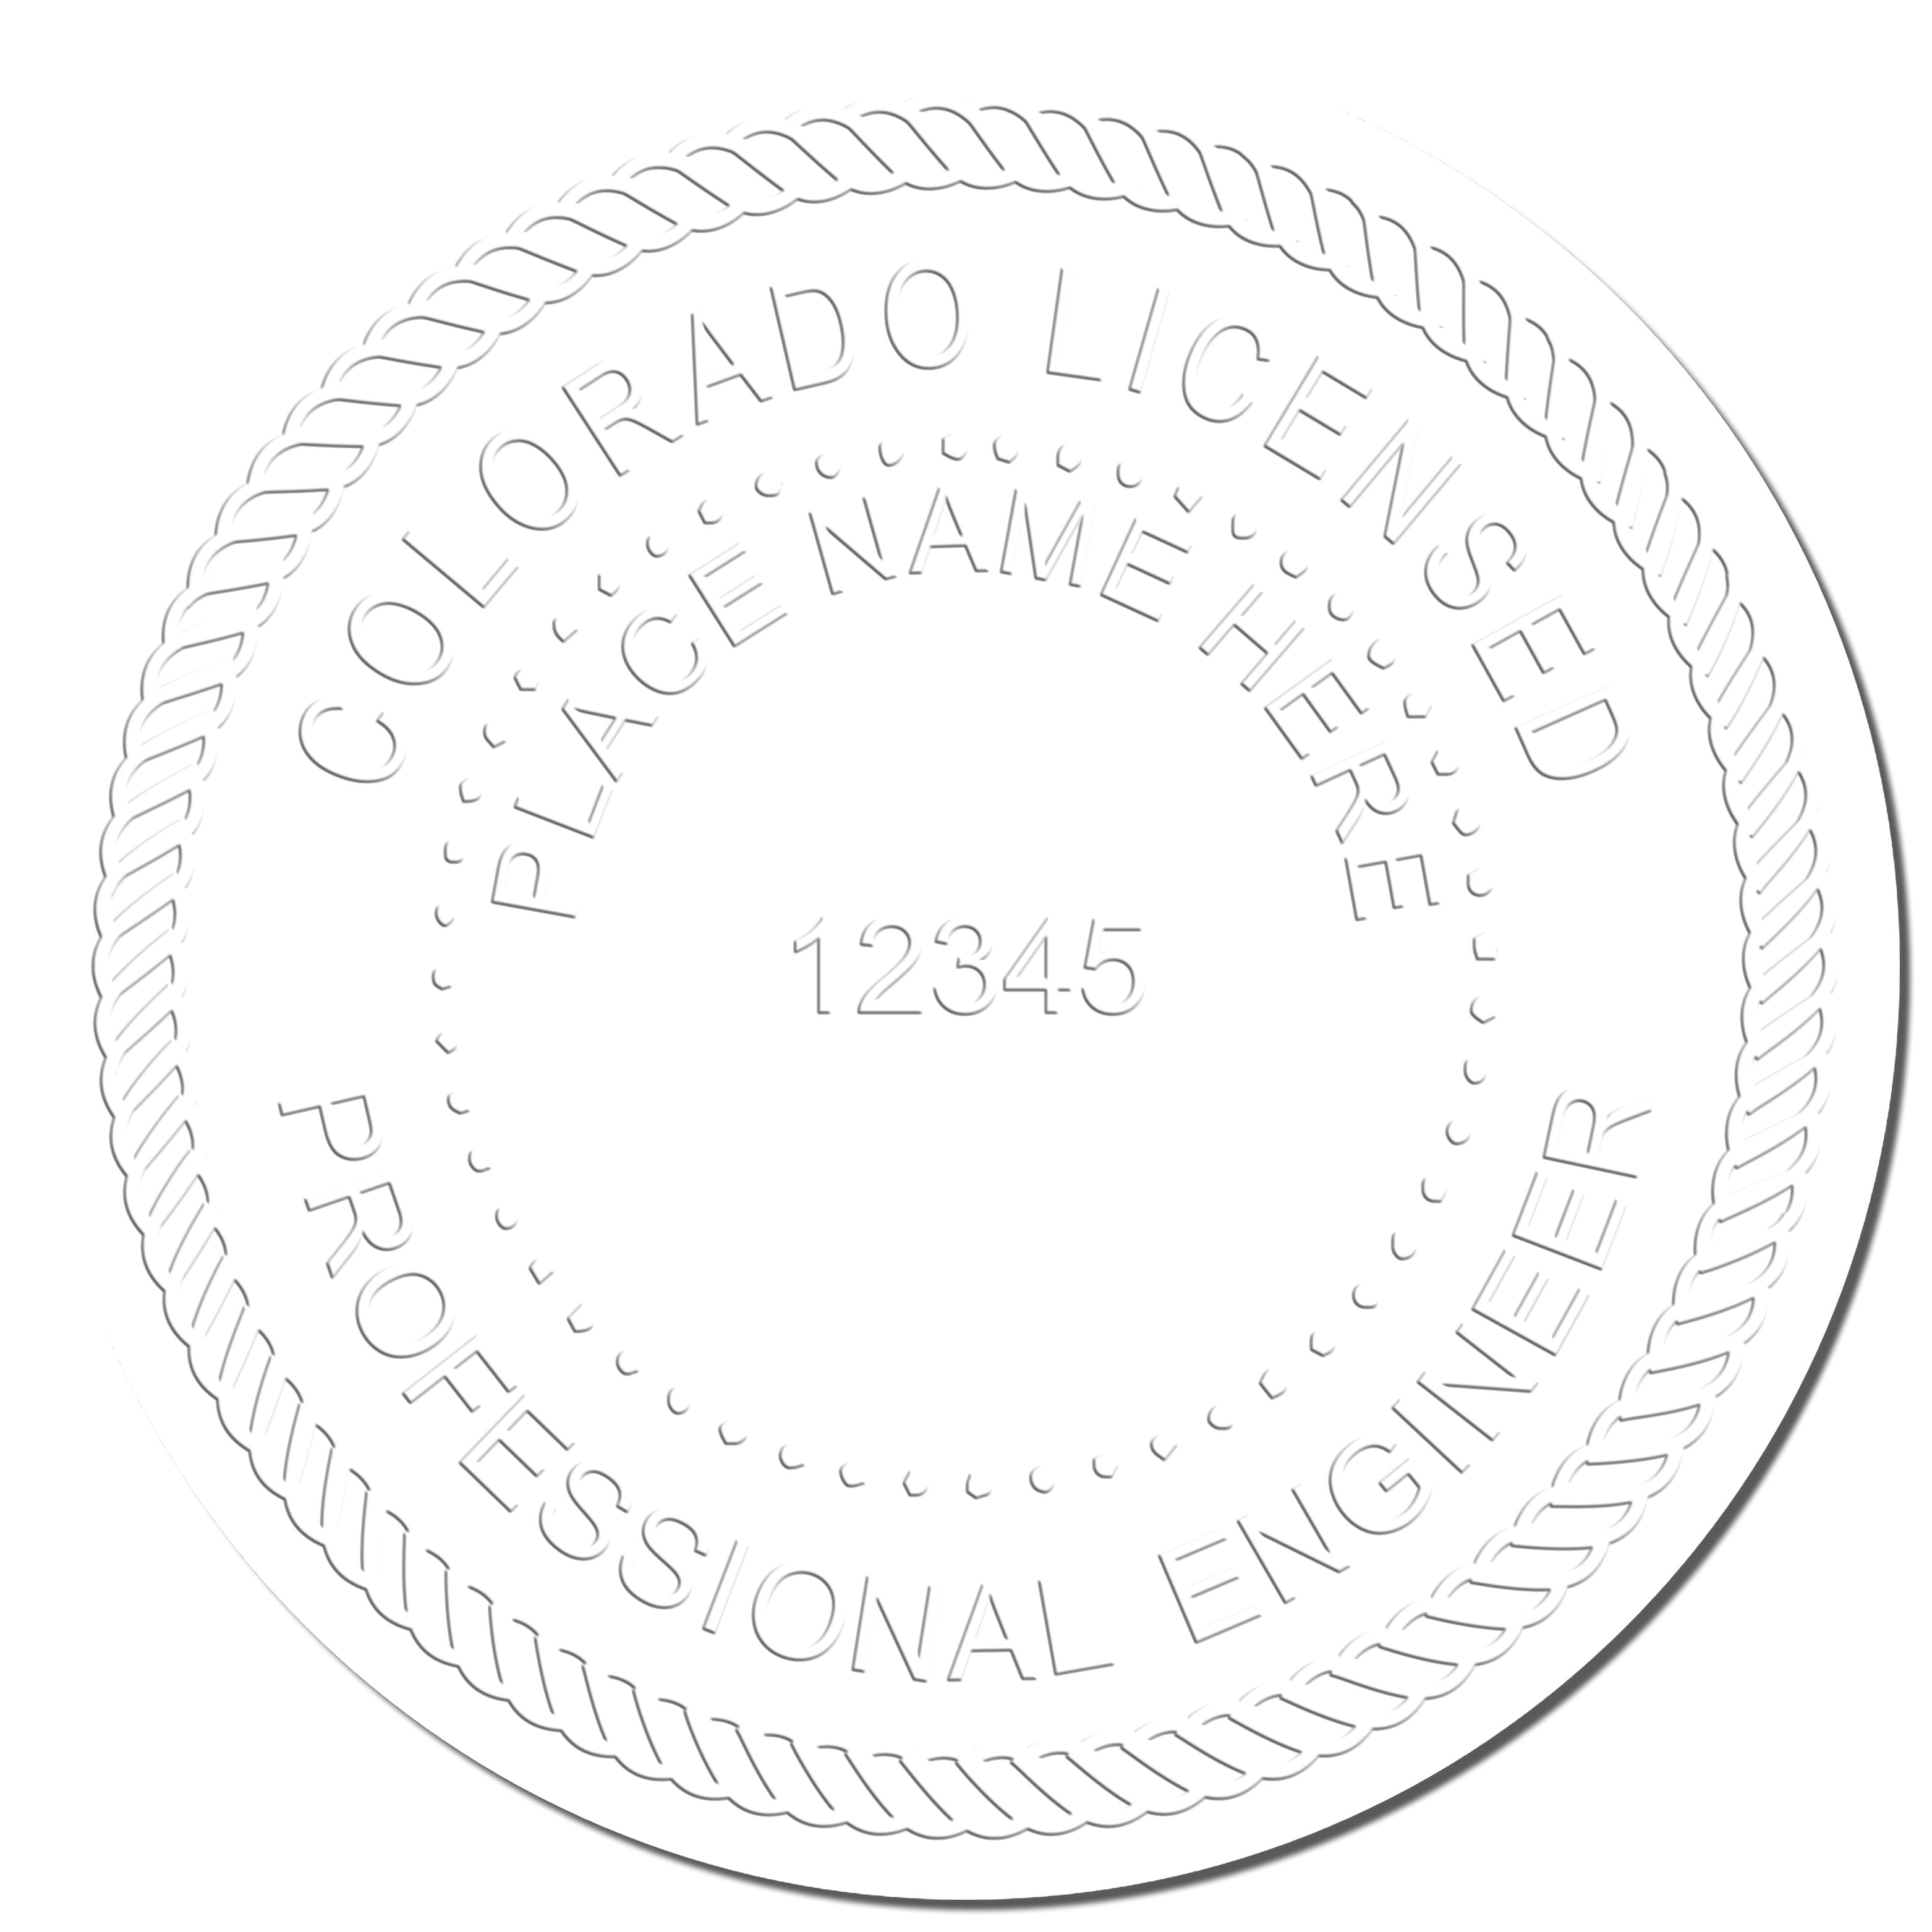 This paper is stamped with a sample imprint of the Gift Colorado Engineer Seal, signifying its quality and reliability.